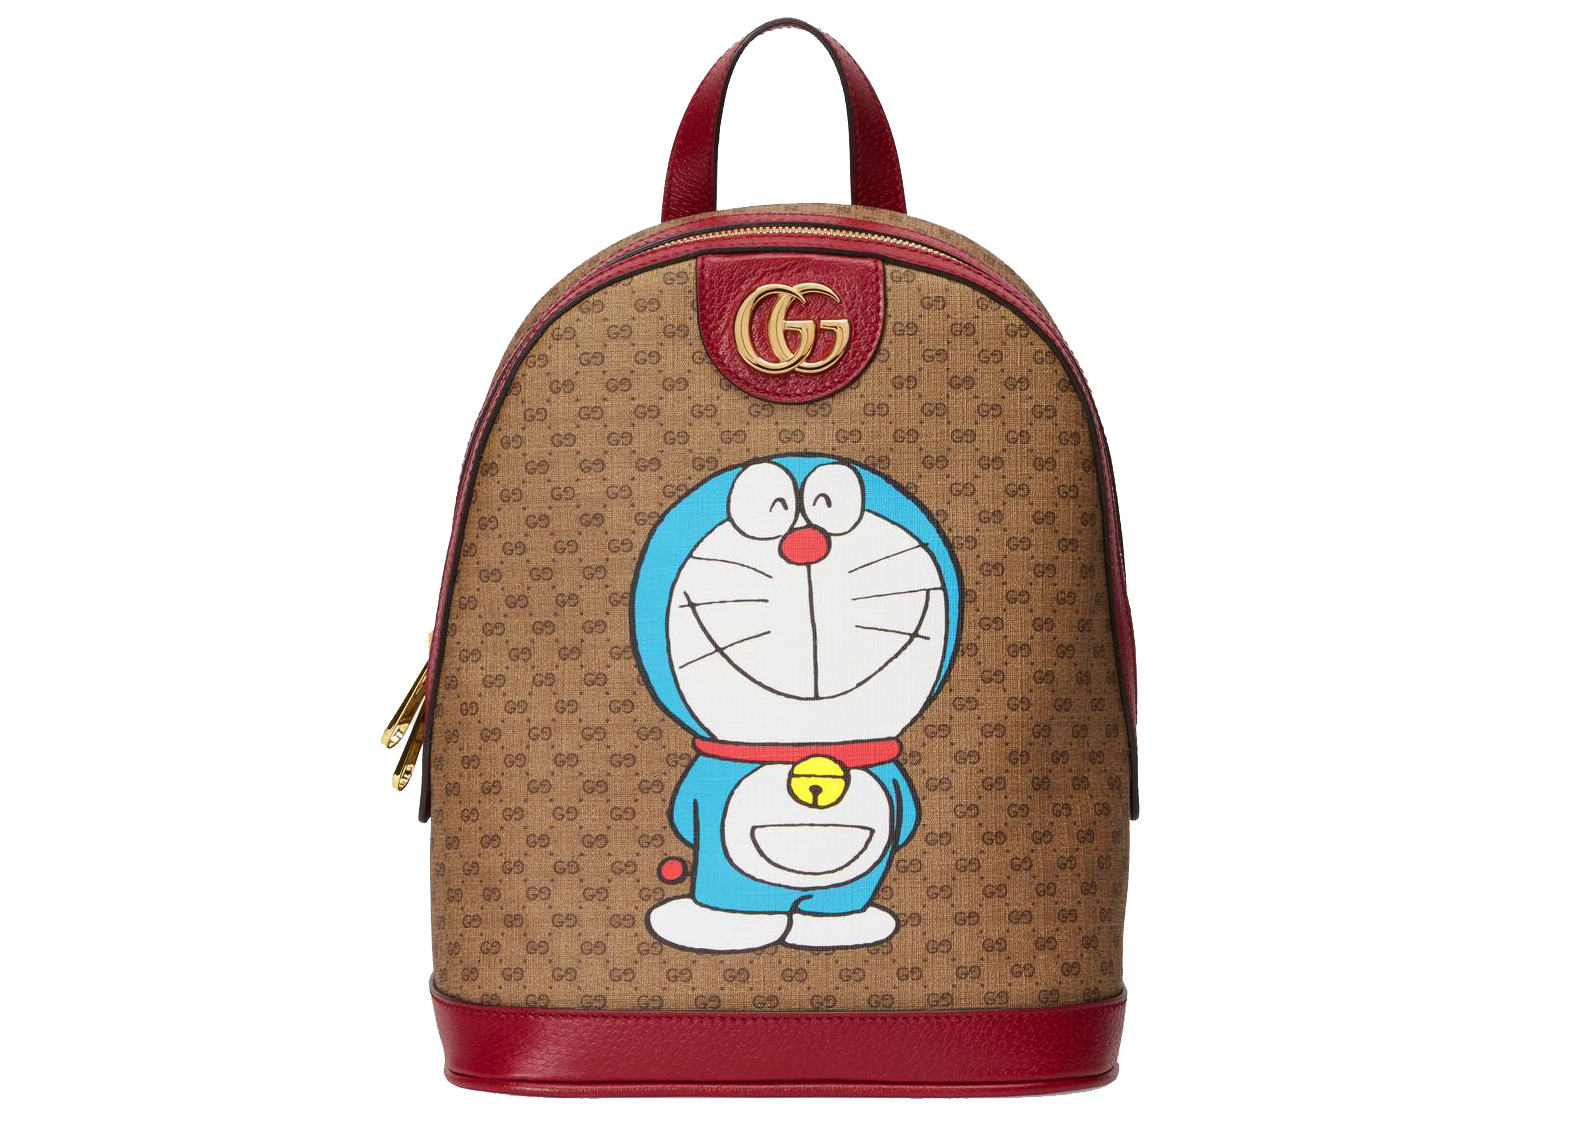 Buy Double Face Pink Doll And Doraemon Bag Soft Material School Bag For  Kids Plush Backpack Cartoon Toy | Children's Gifts Boy/Girl/Baby For Kids (  Age 2 to 6 Year ) Suitable